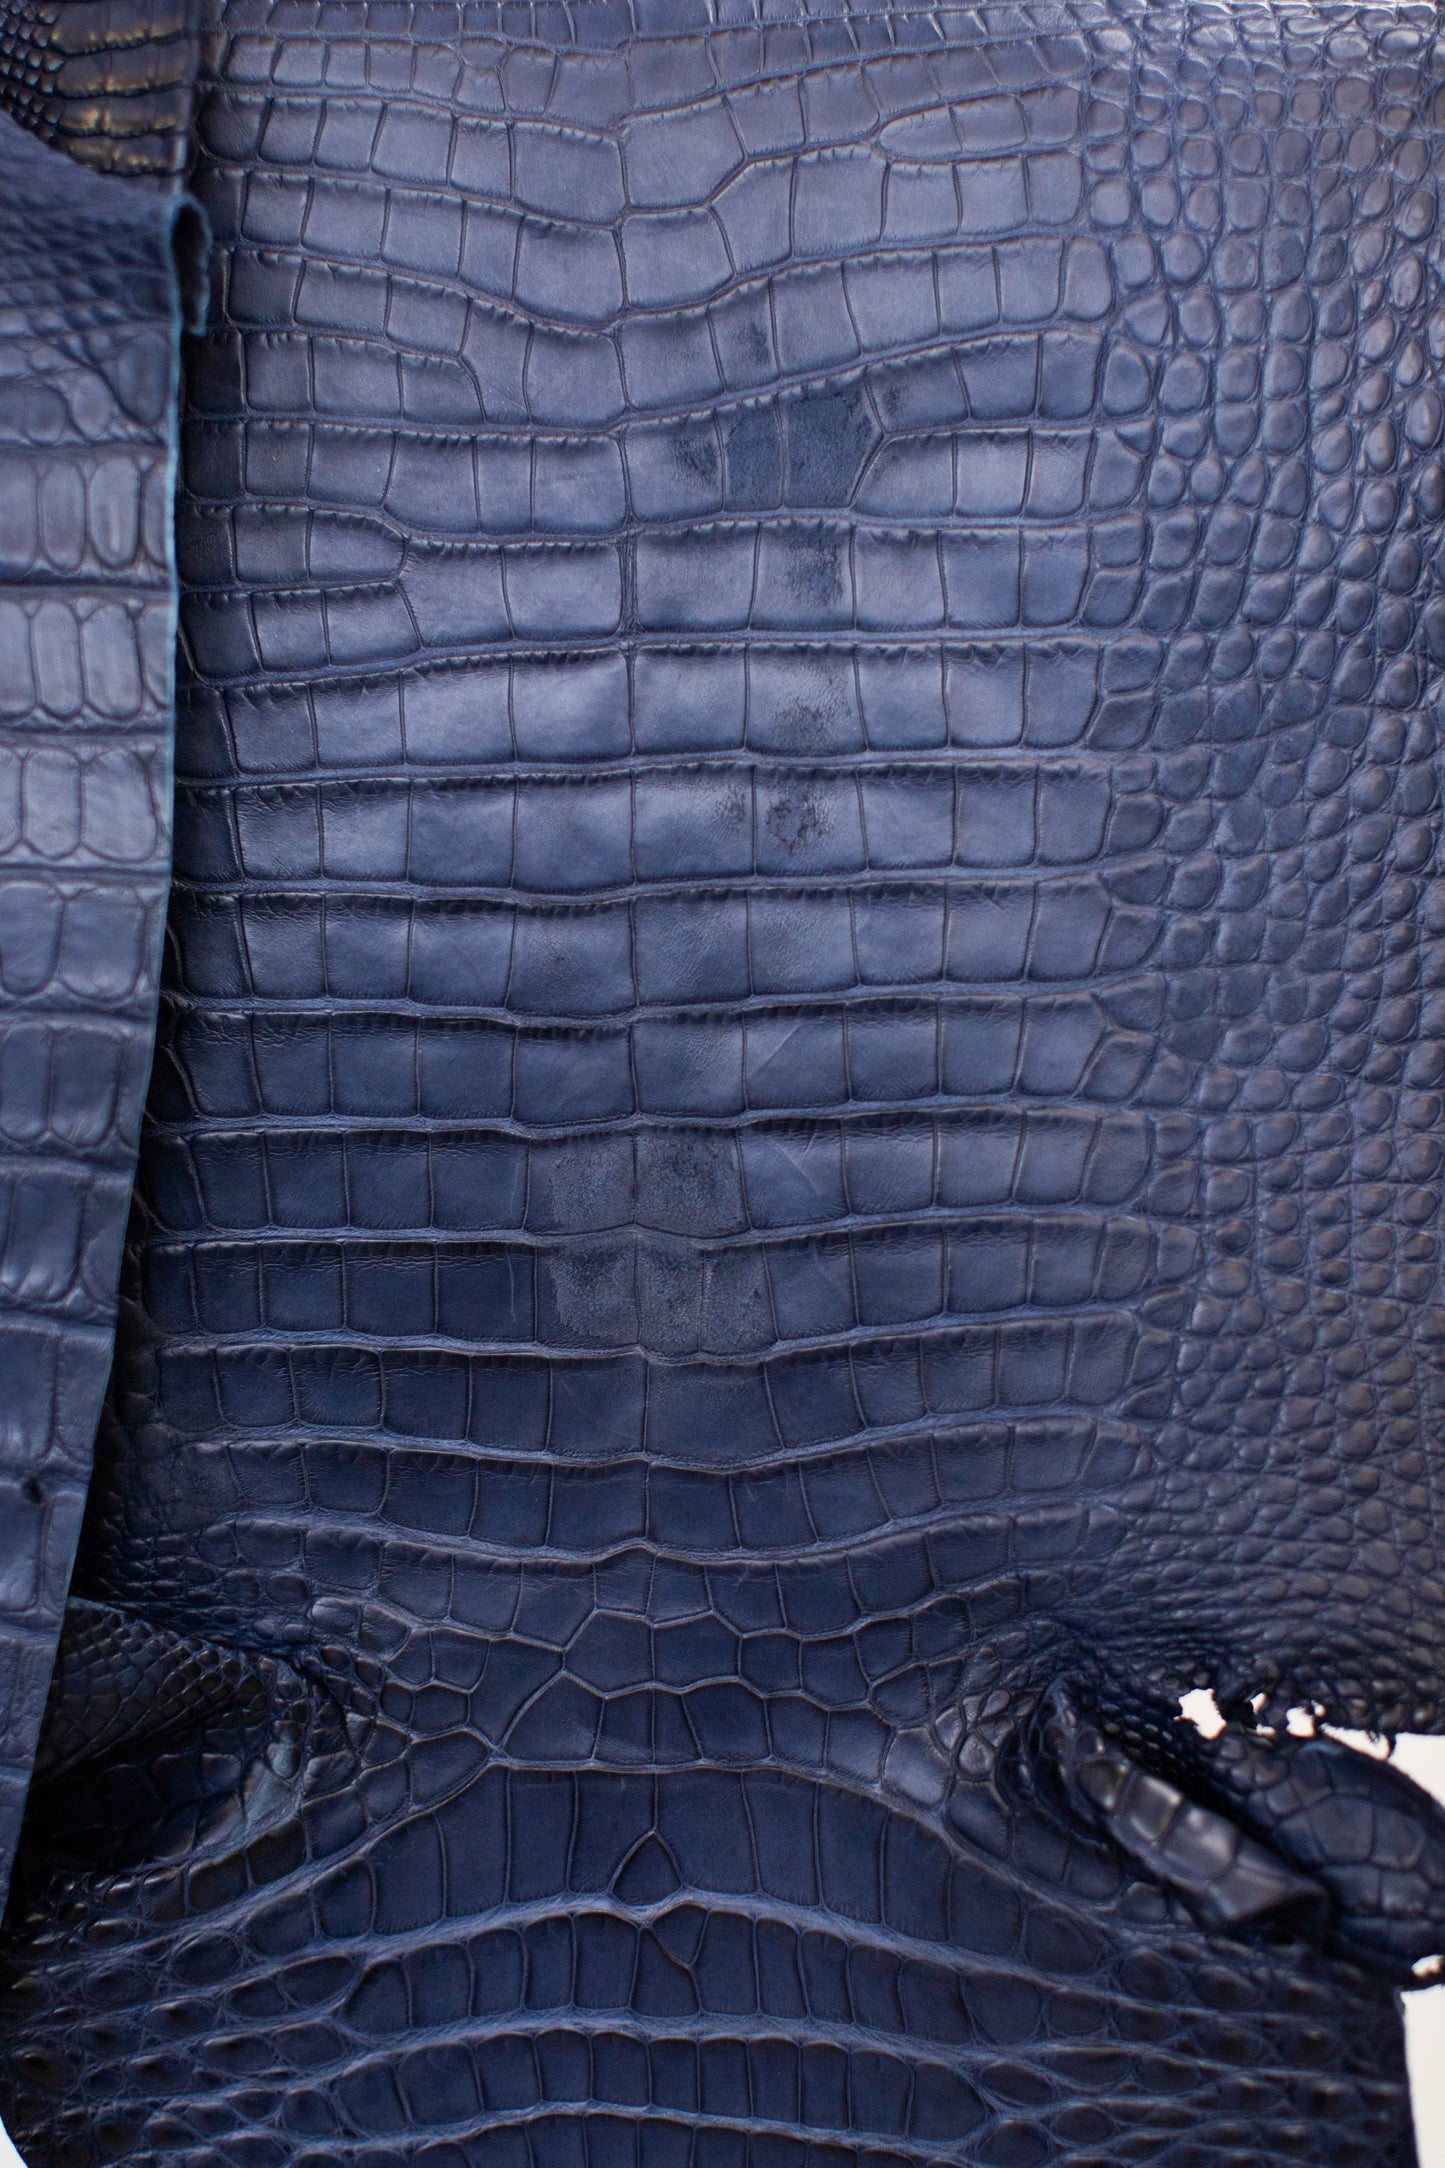 CLOSEOUT - Navy Blue Matte Farm Raised Alligator Belly from size 24-25 cm | Reject due to raw skin degradation